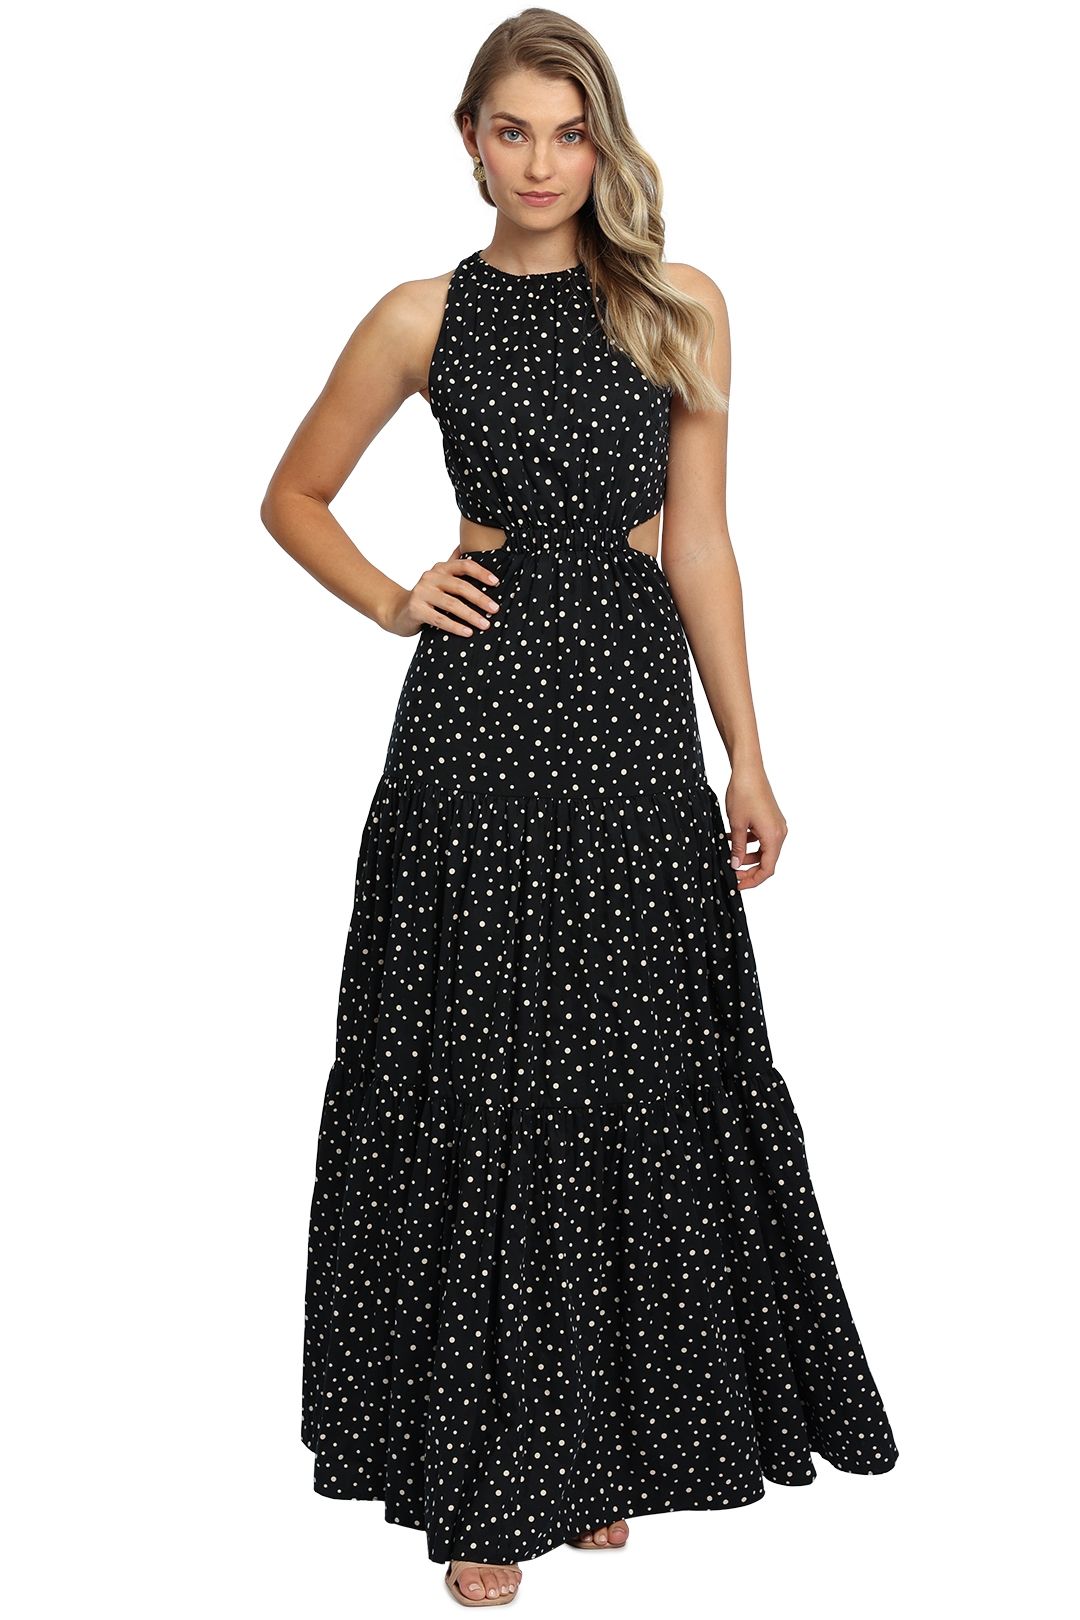 Significant Other Poppy Dress Black Cream Polka maxi